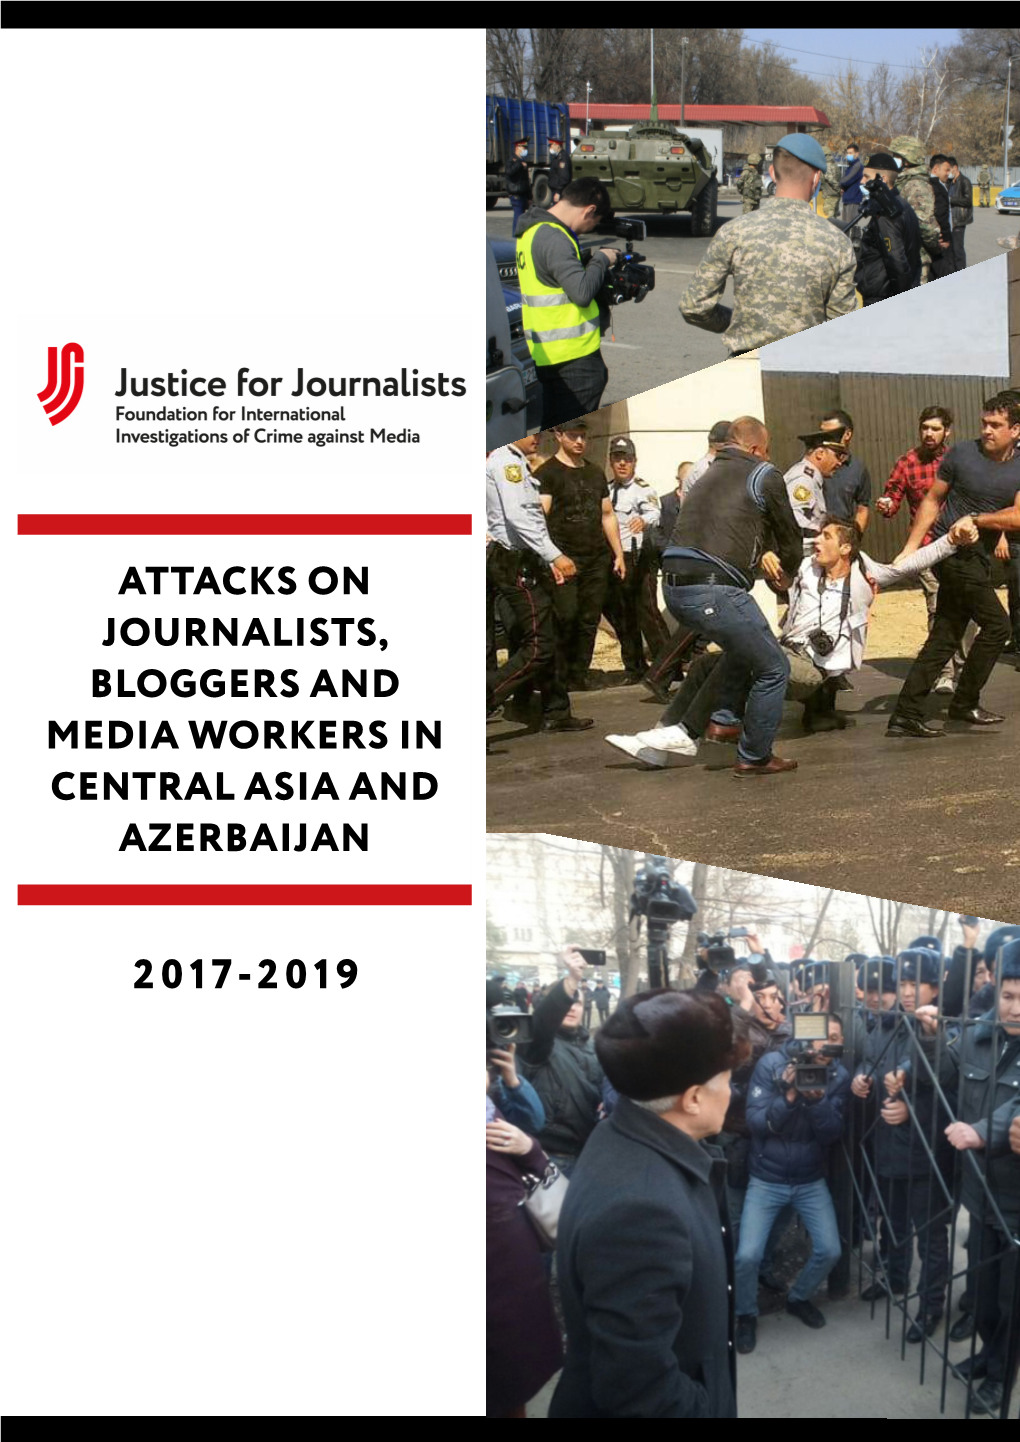 Attacks on Journalists, Bloggers and Media Workers in Central Asia and Azerbaijan